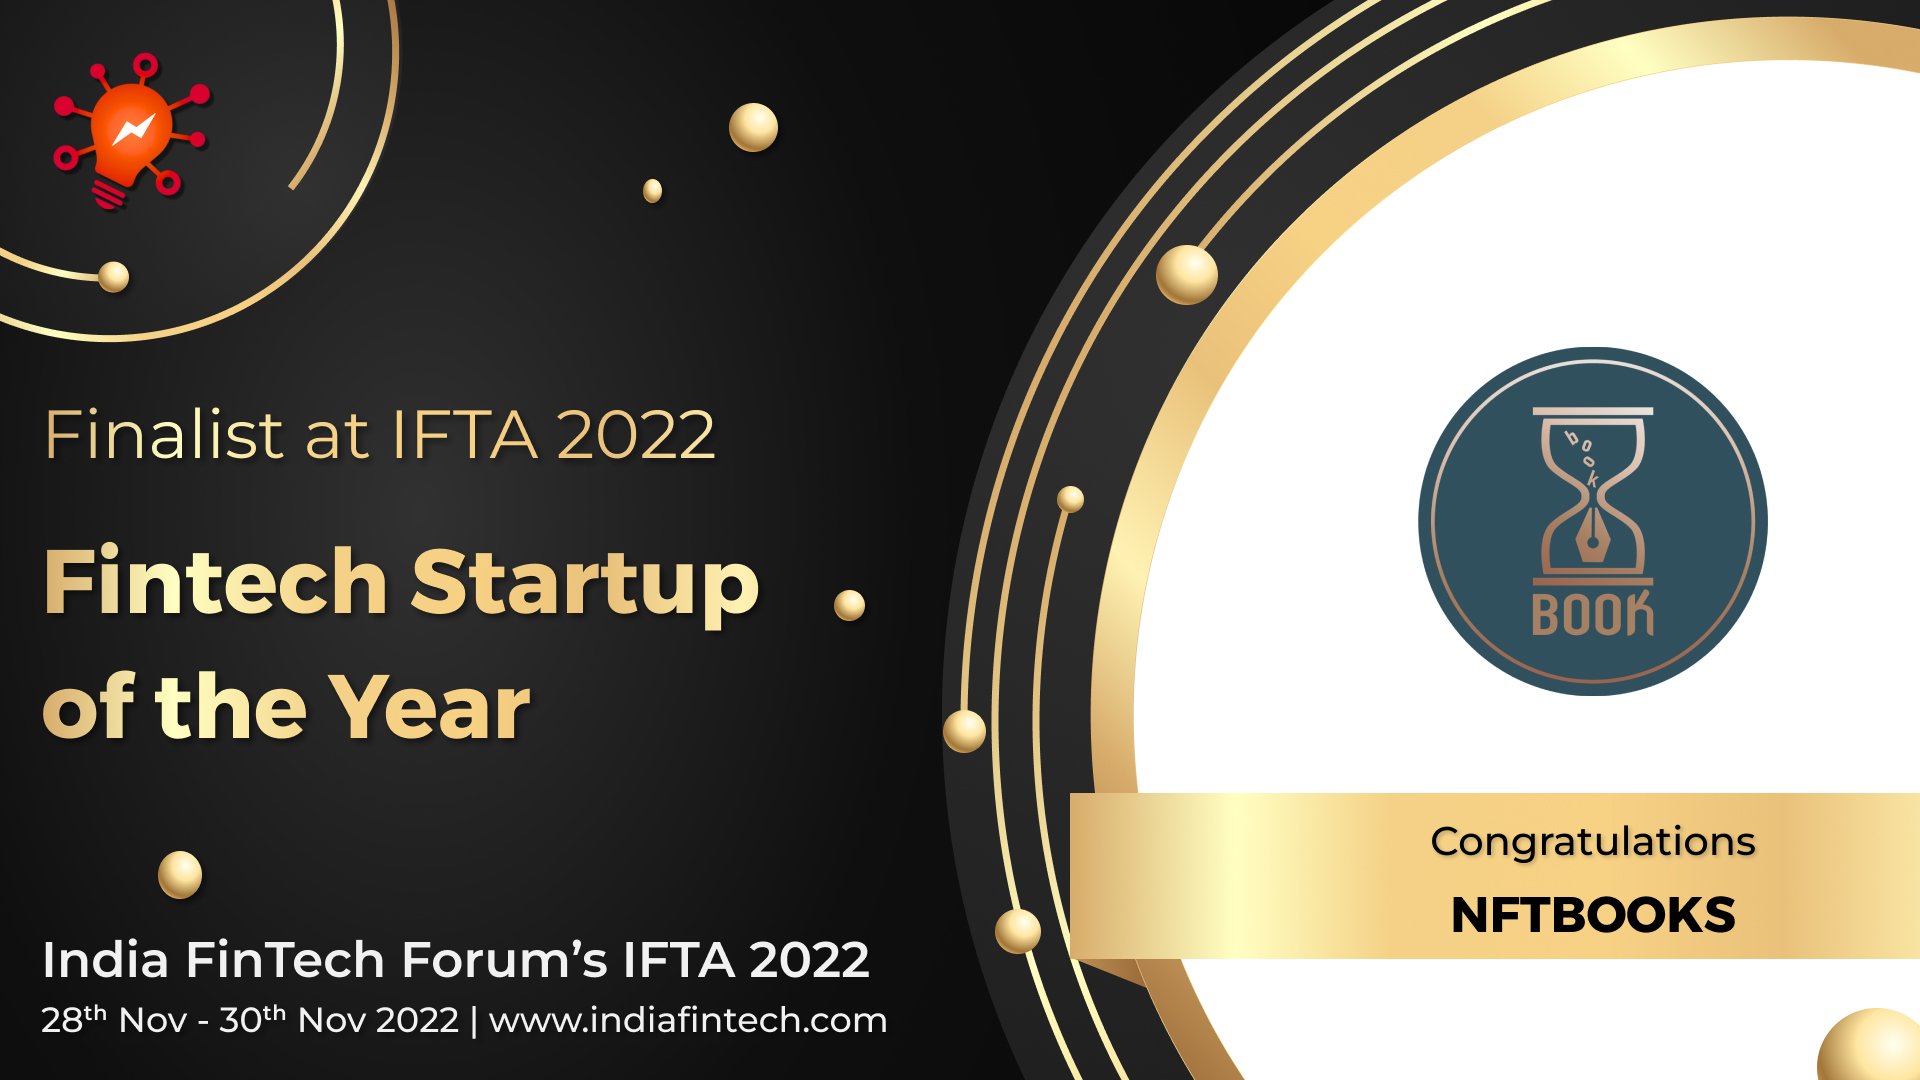 NFTBOOKS advanced to the final round of the India FinTech Award 2022's FinTech Startup of the Year competition